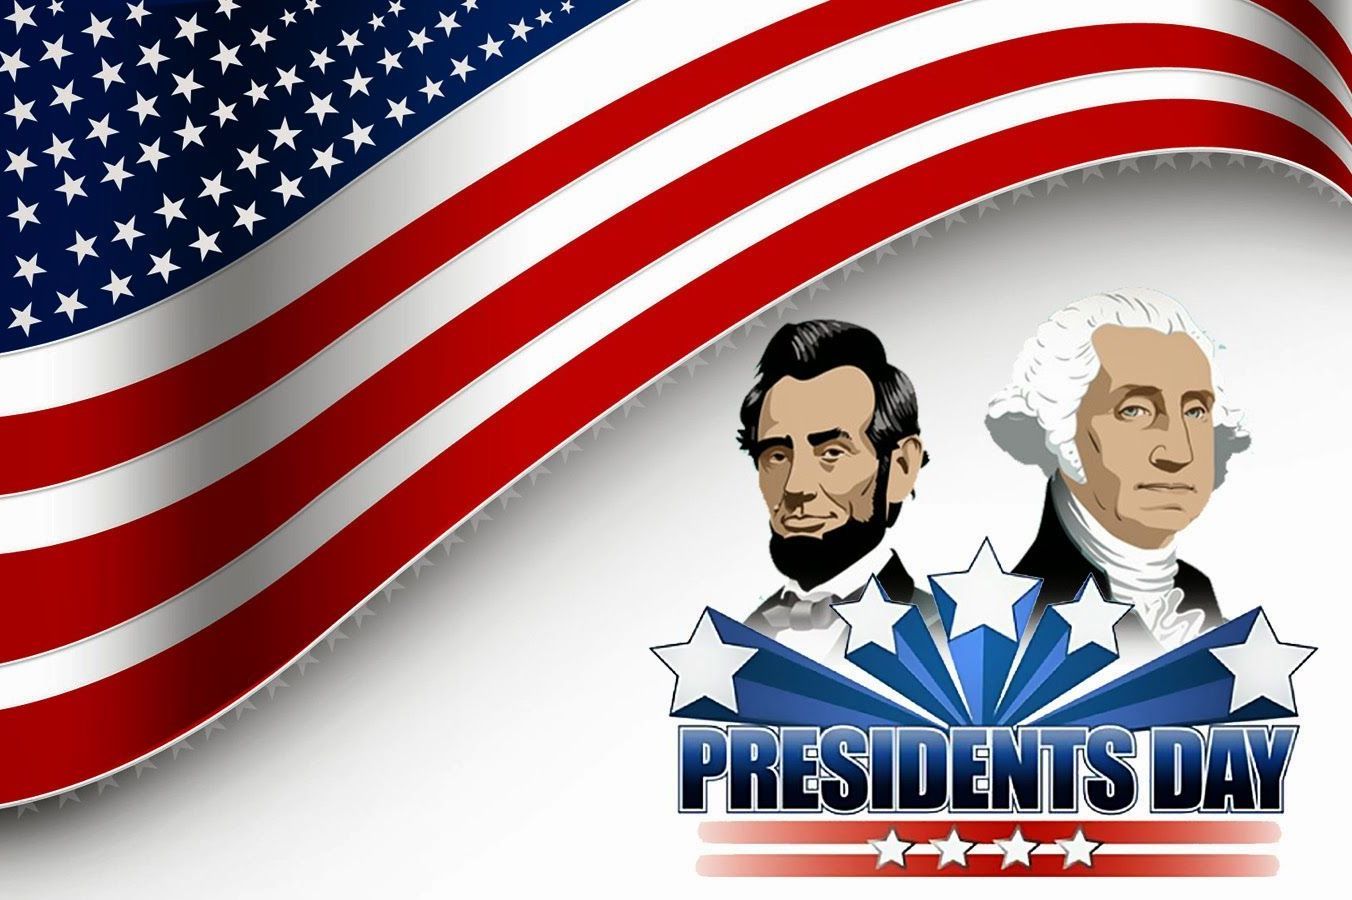 President Day Images